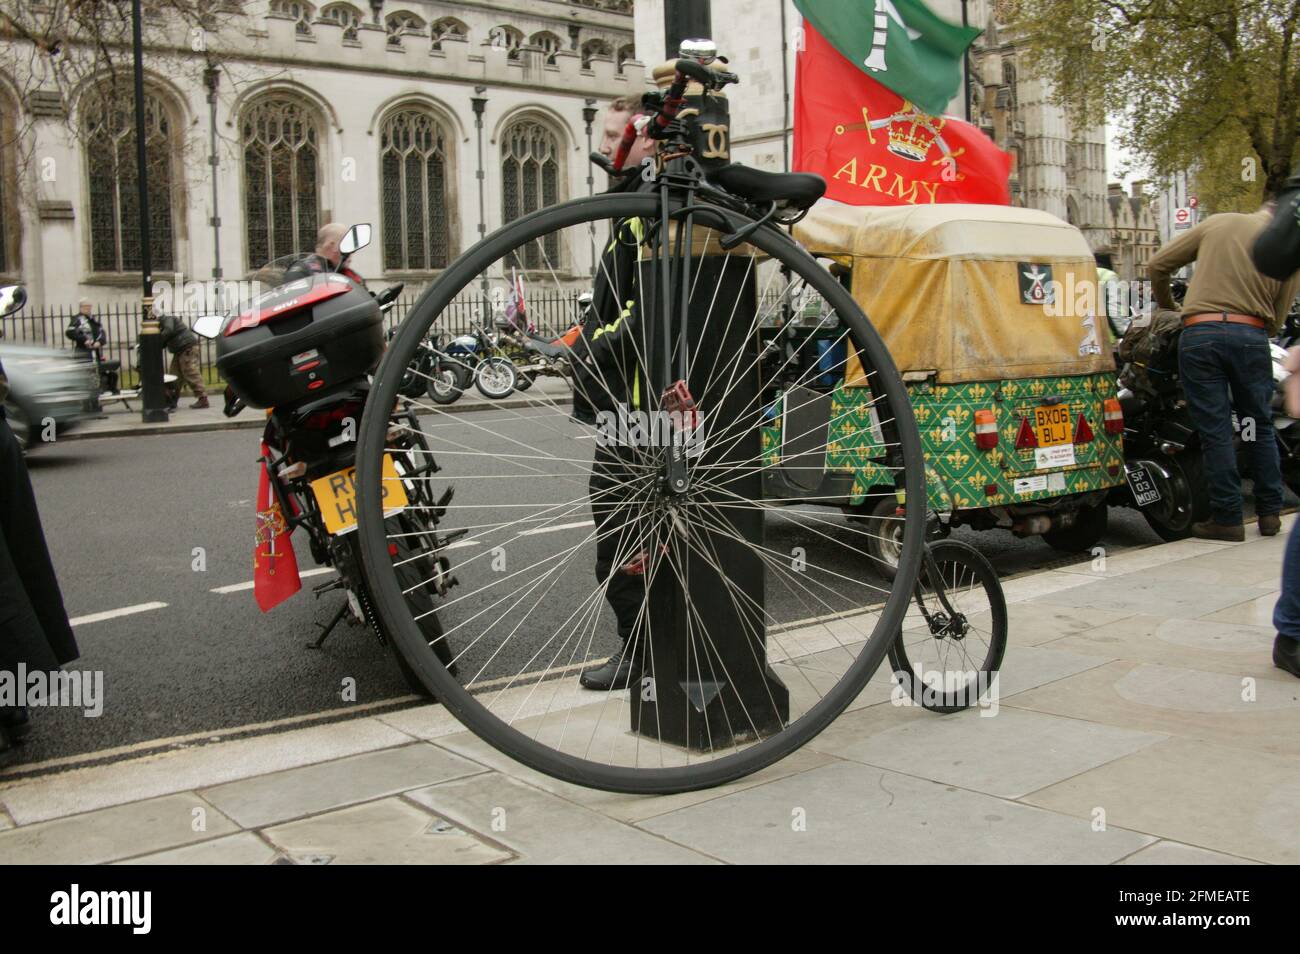 Bikers from across the country gather in Parliament Square in Central London for the 3rd Rolling Thunder Protest in support of veterans facing charges during their time in Northern Ireland. Stock Photo